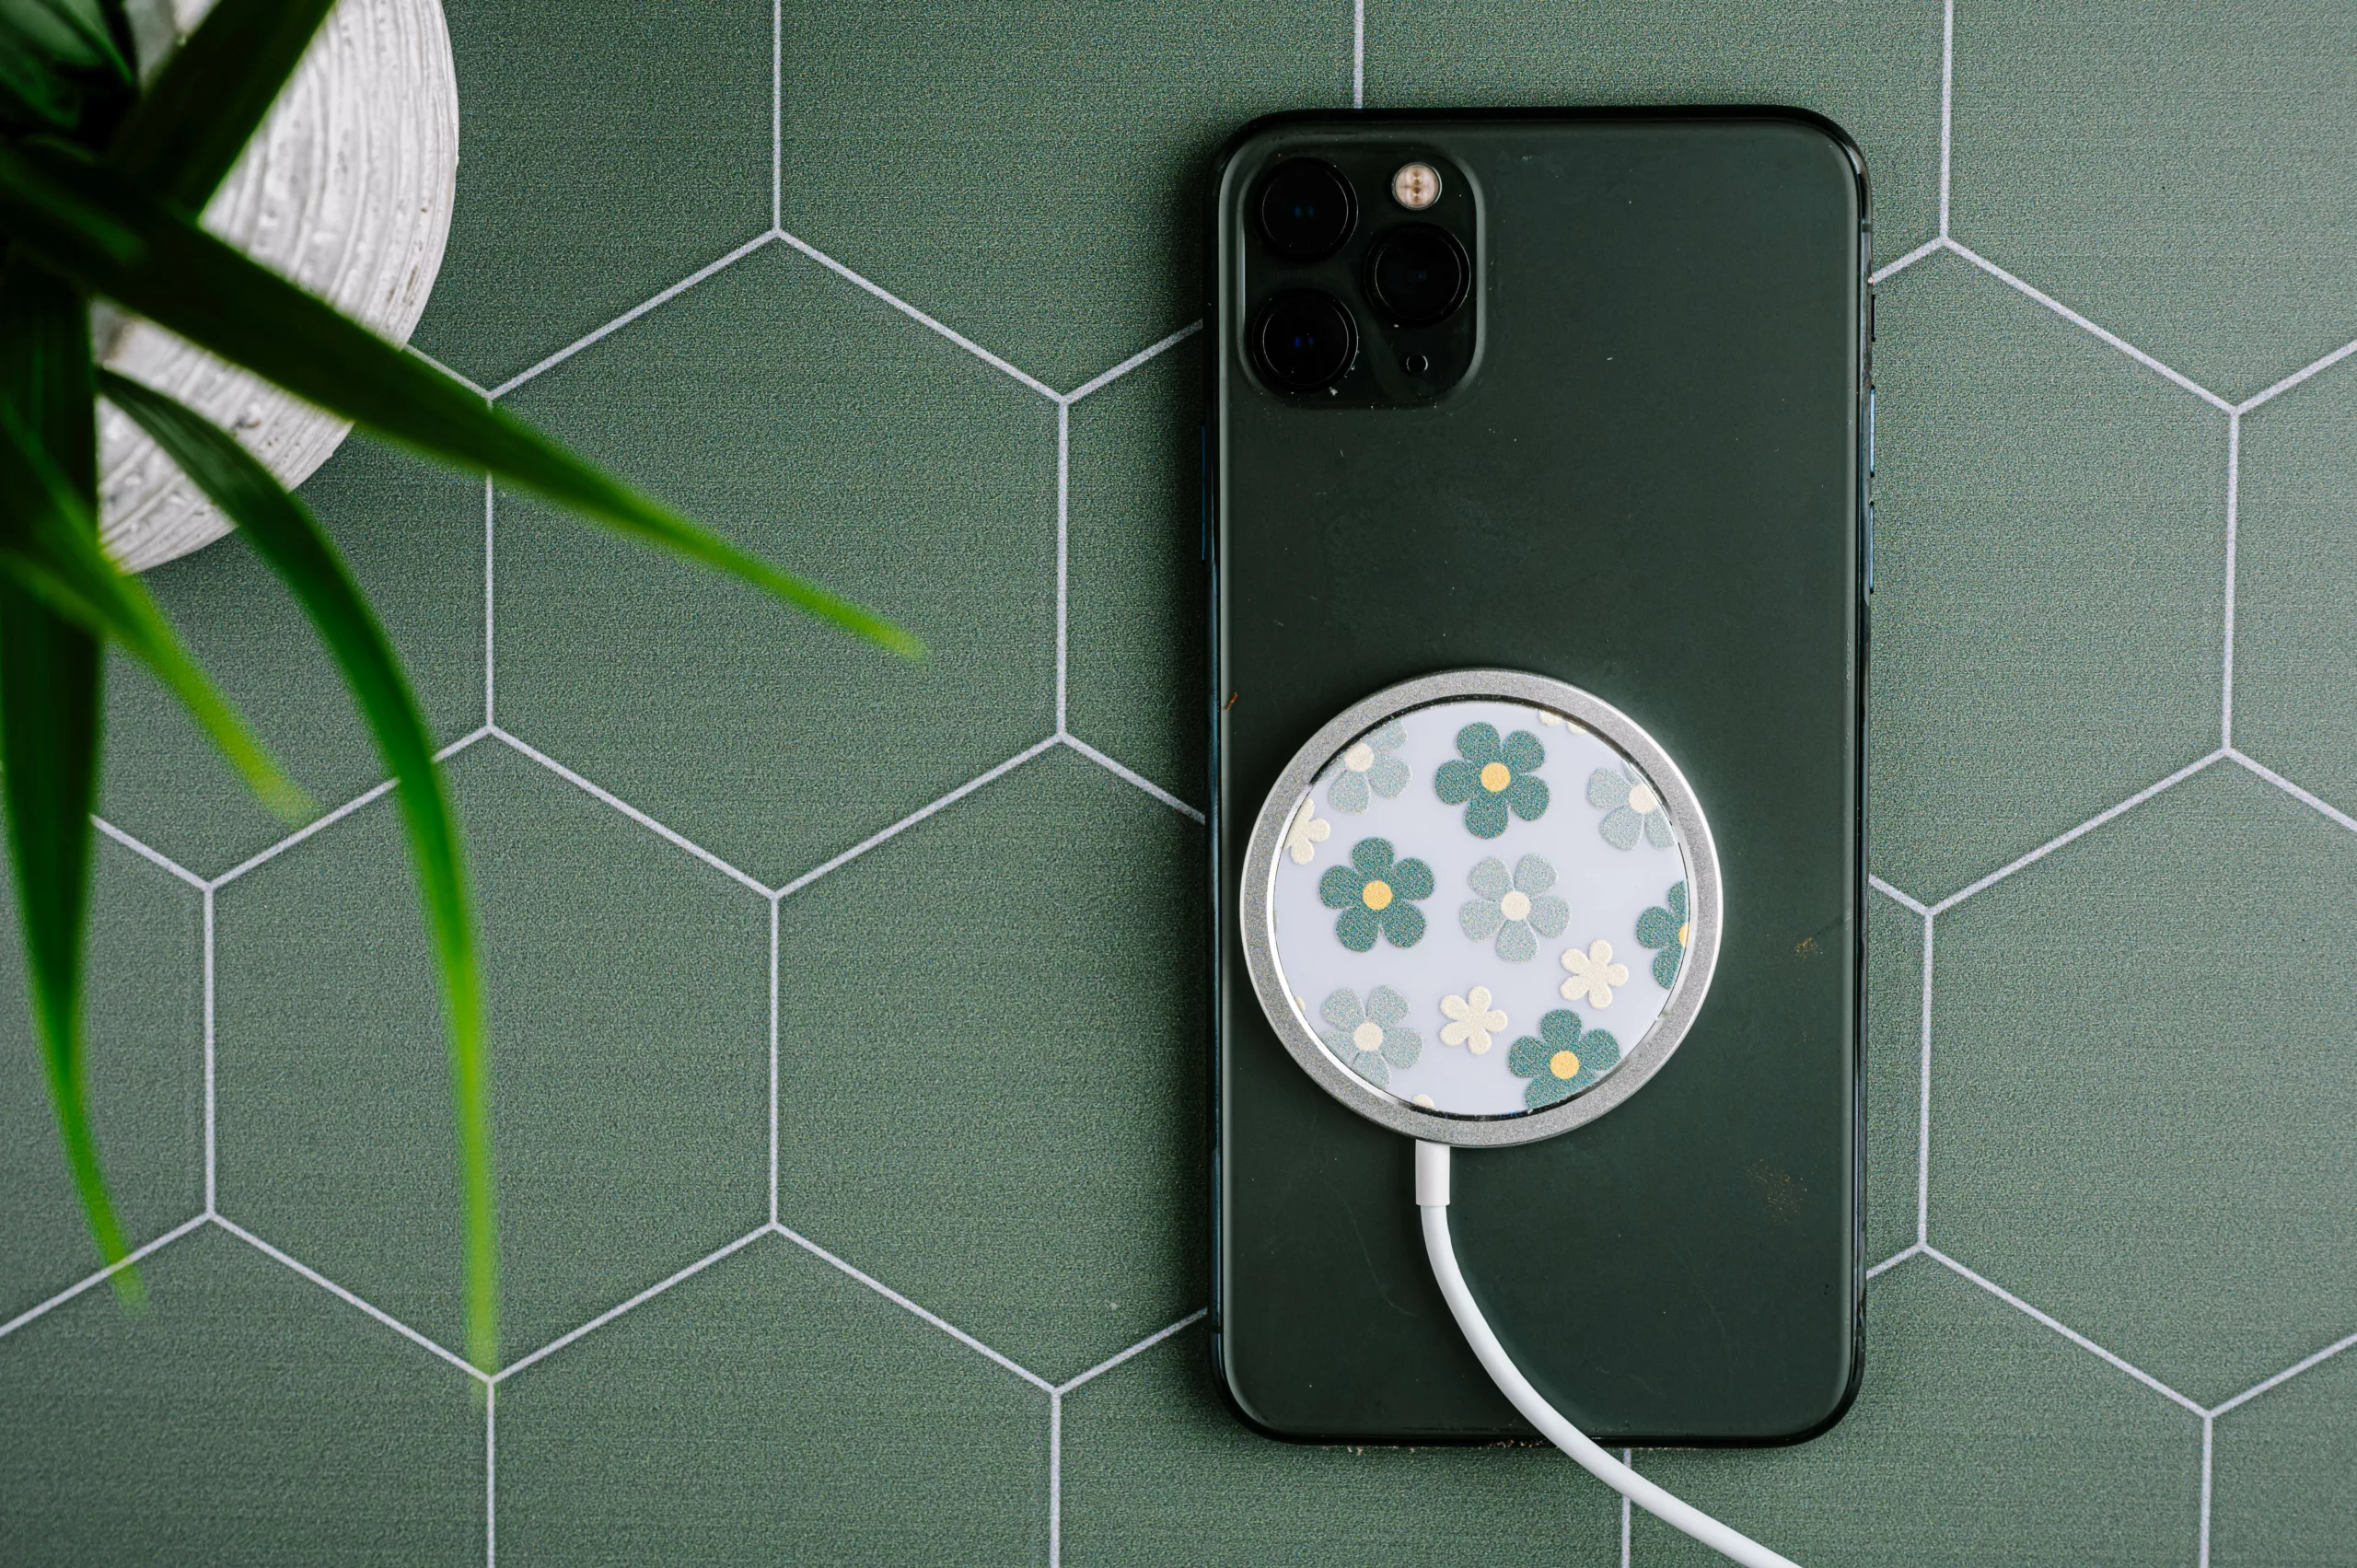 Product photography or magnetic charger